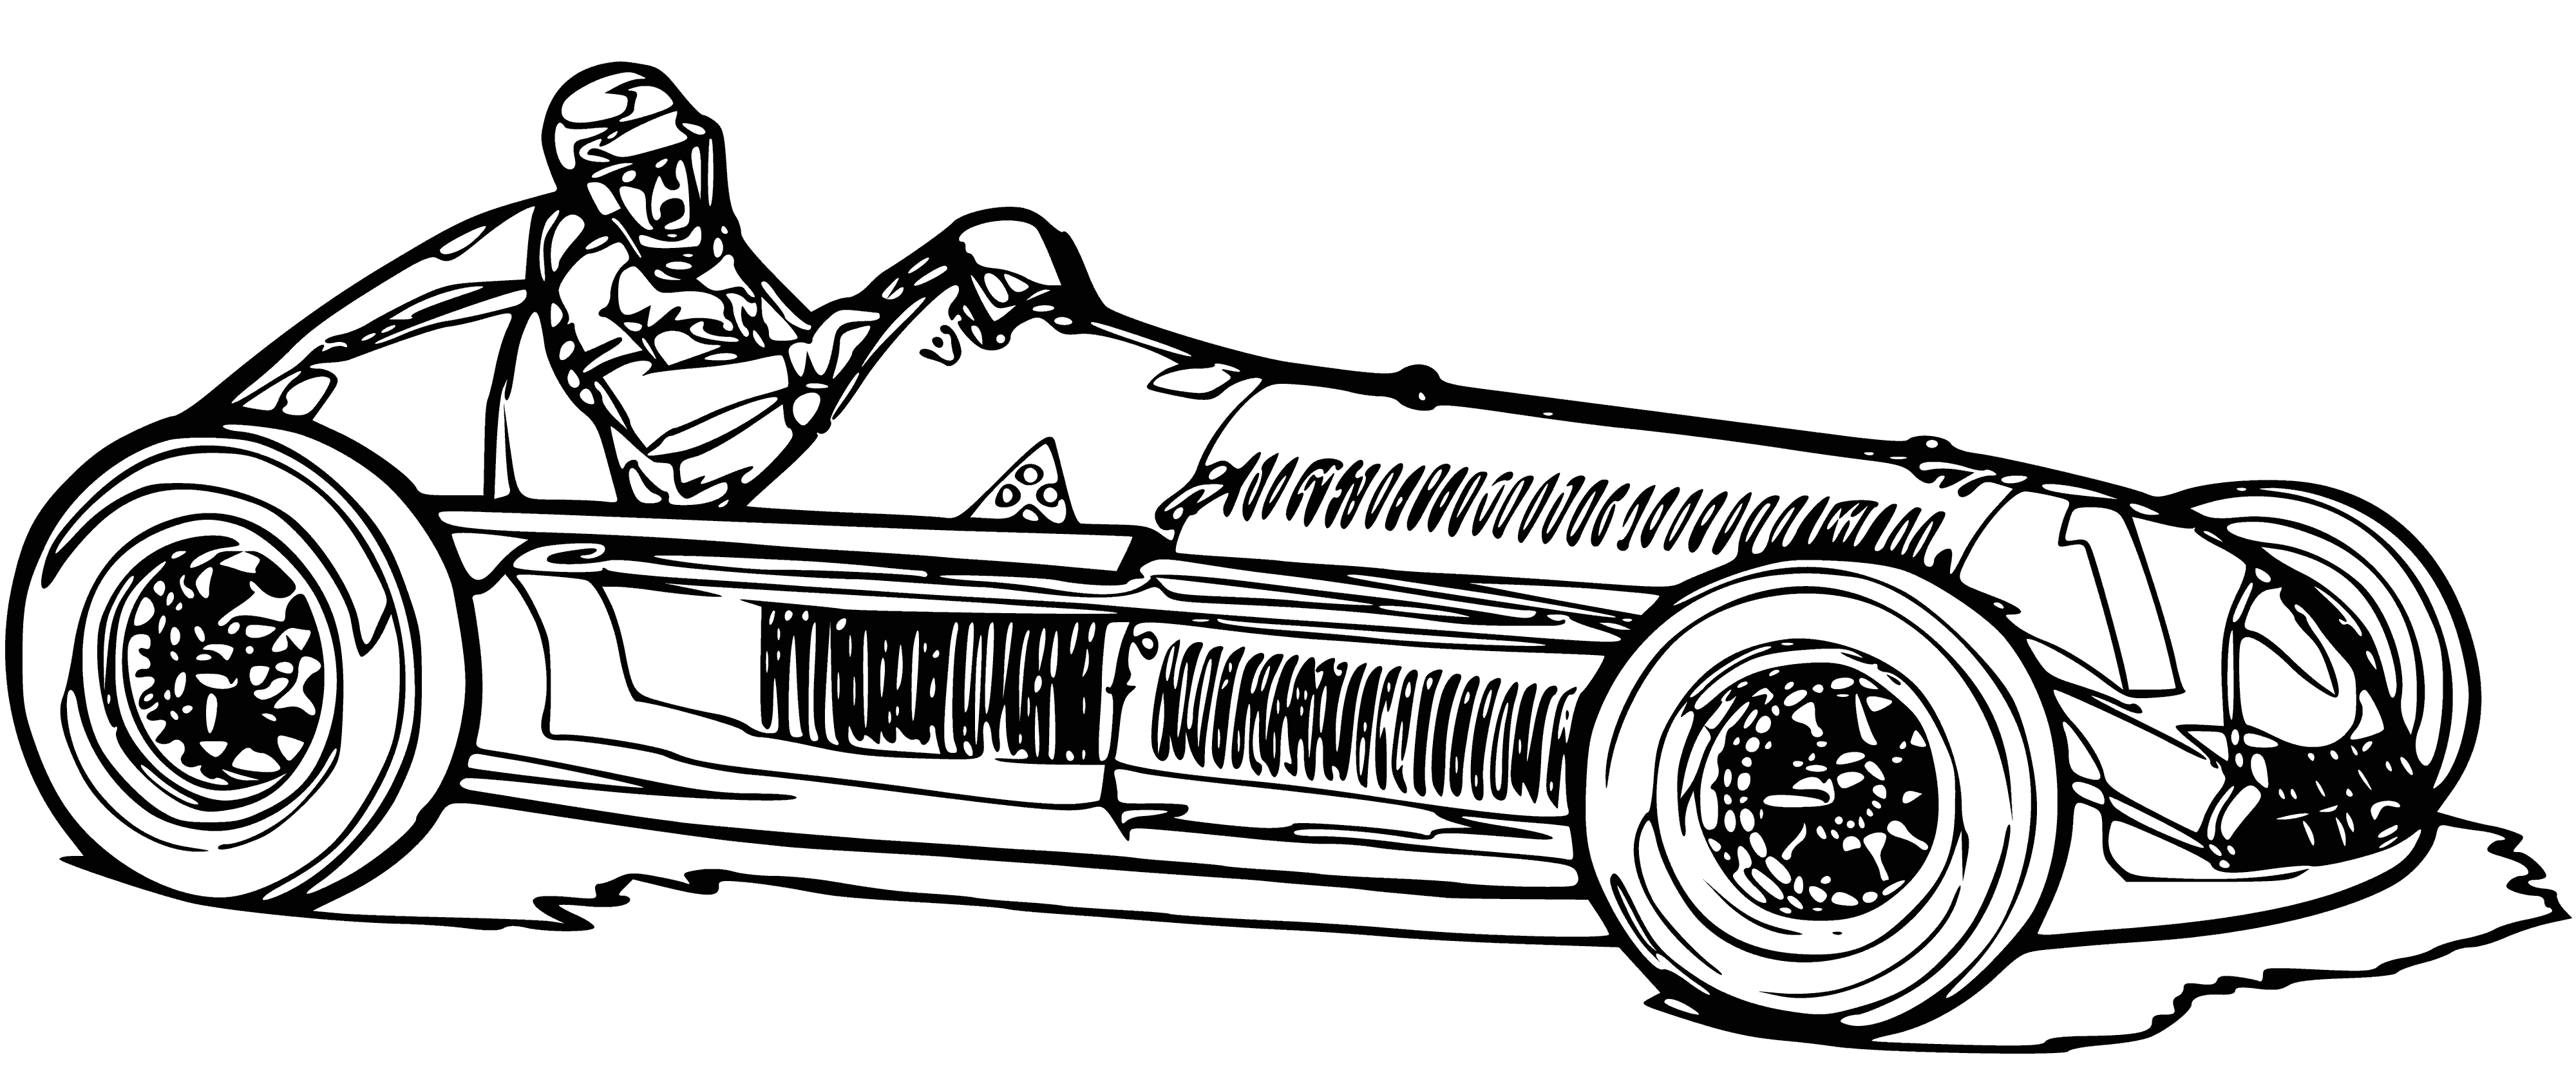 1950 coloring page